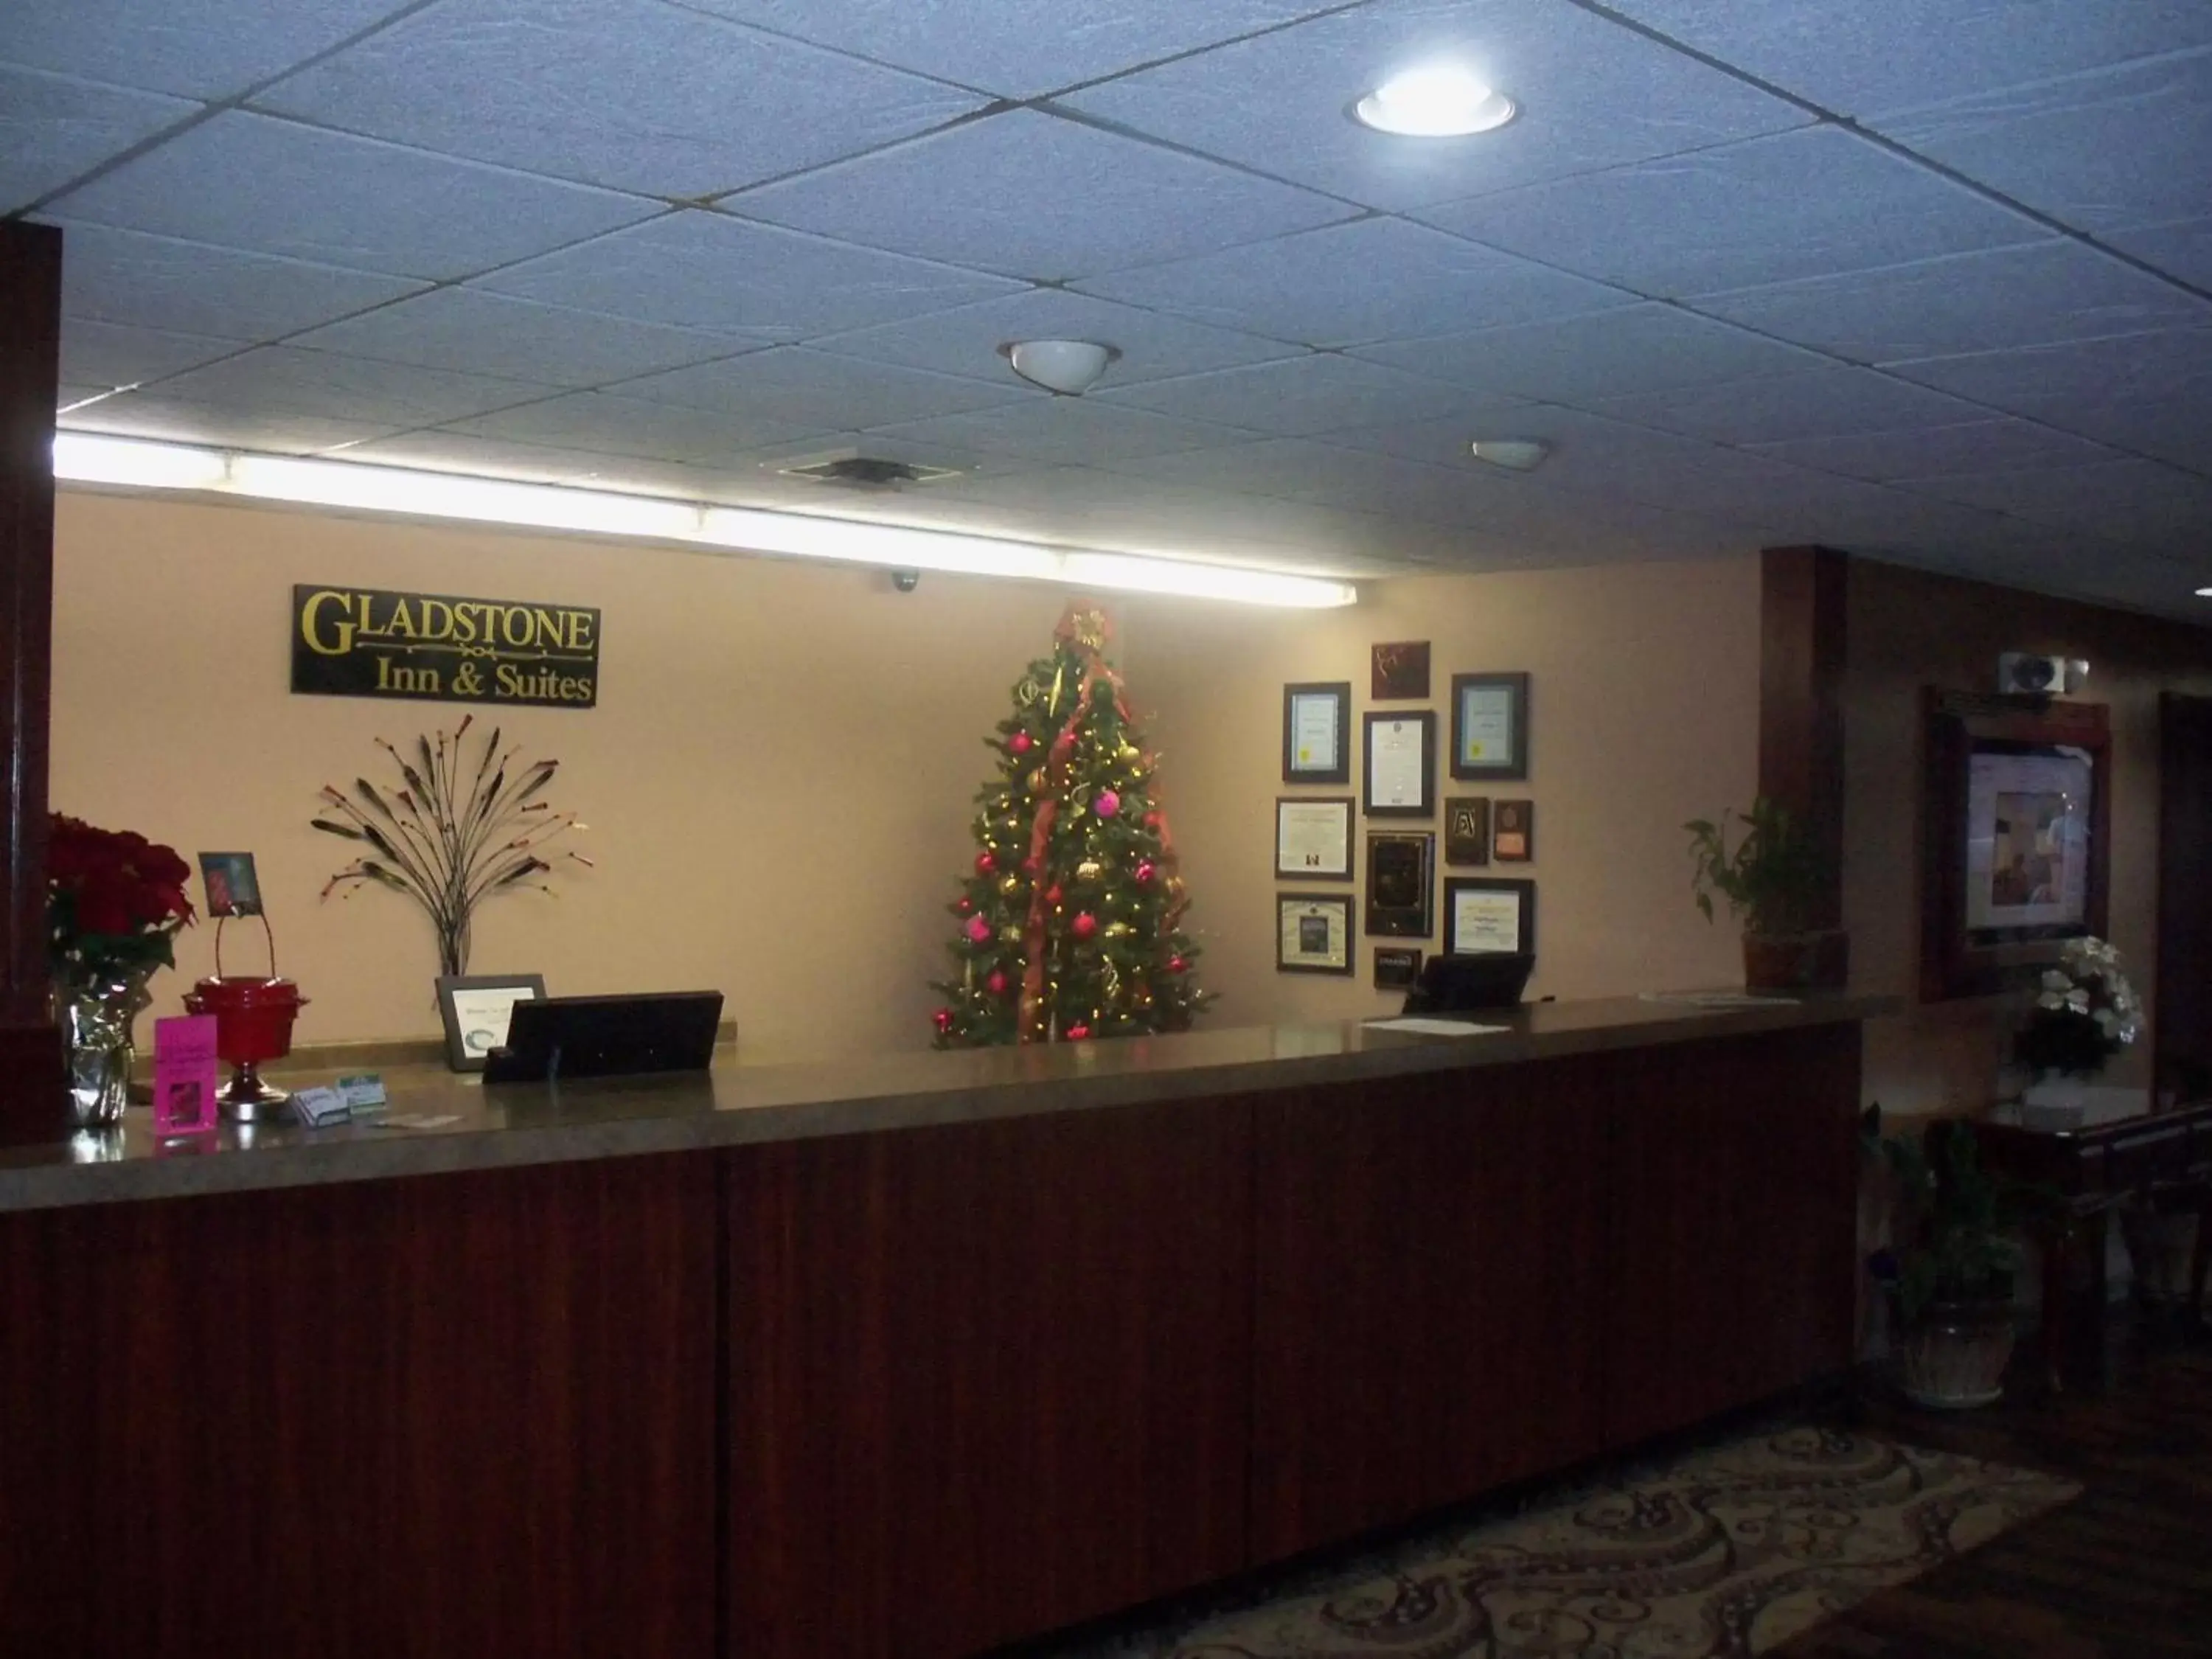 Property logo or sign, Lobby/Reception in Gladstone Inn and Suites